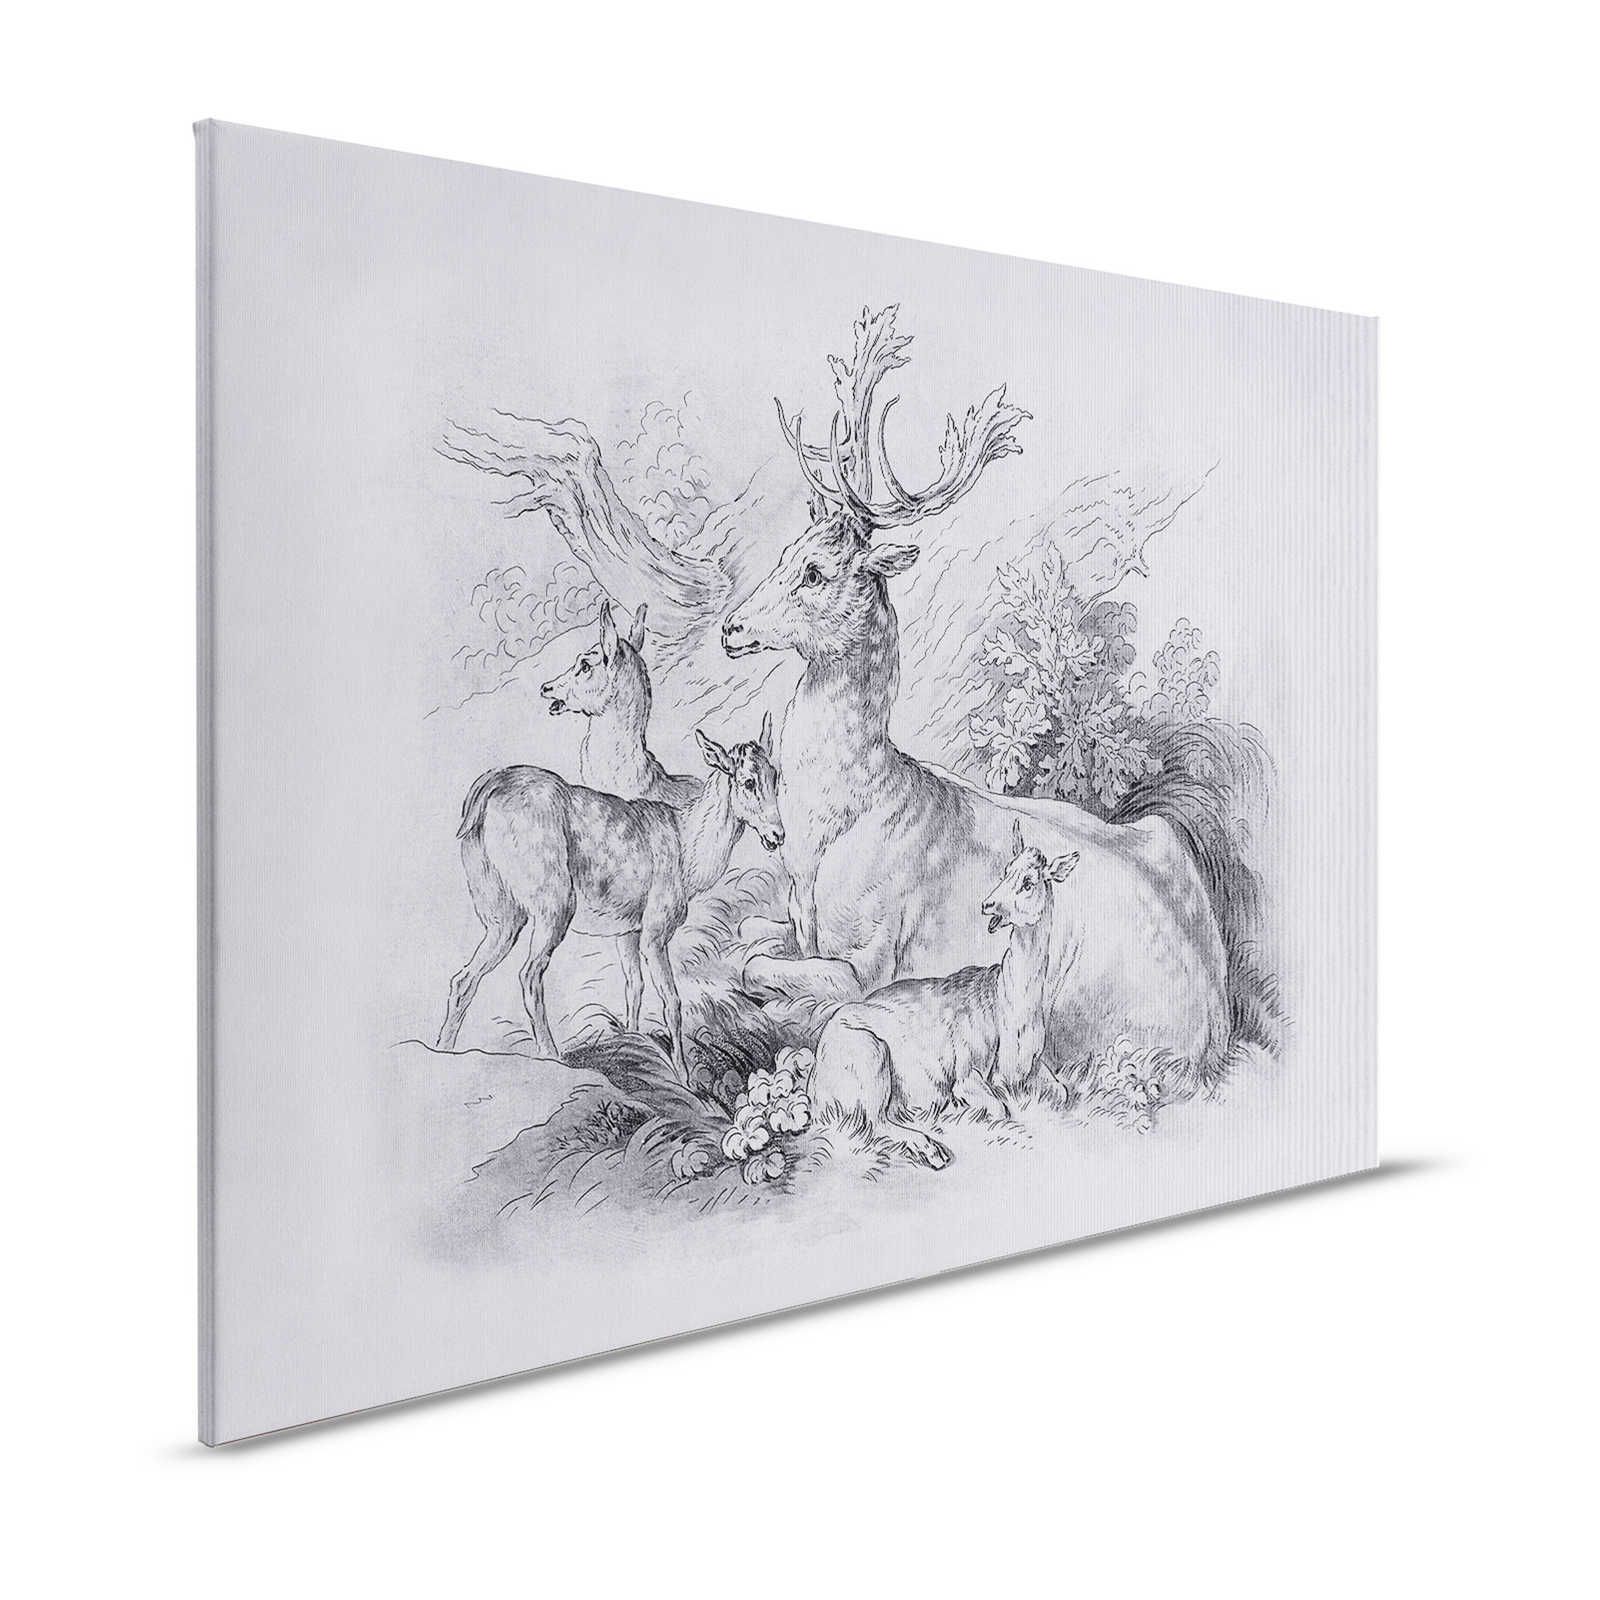 On the Grass 2 - Canvas painting Deer & Stag Vintage Drawing in Grey - 1.20 m x 0.80 m
